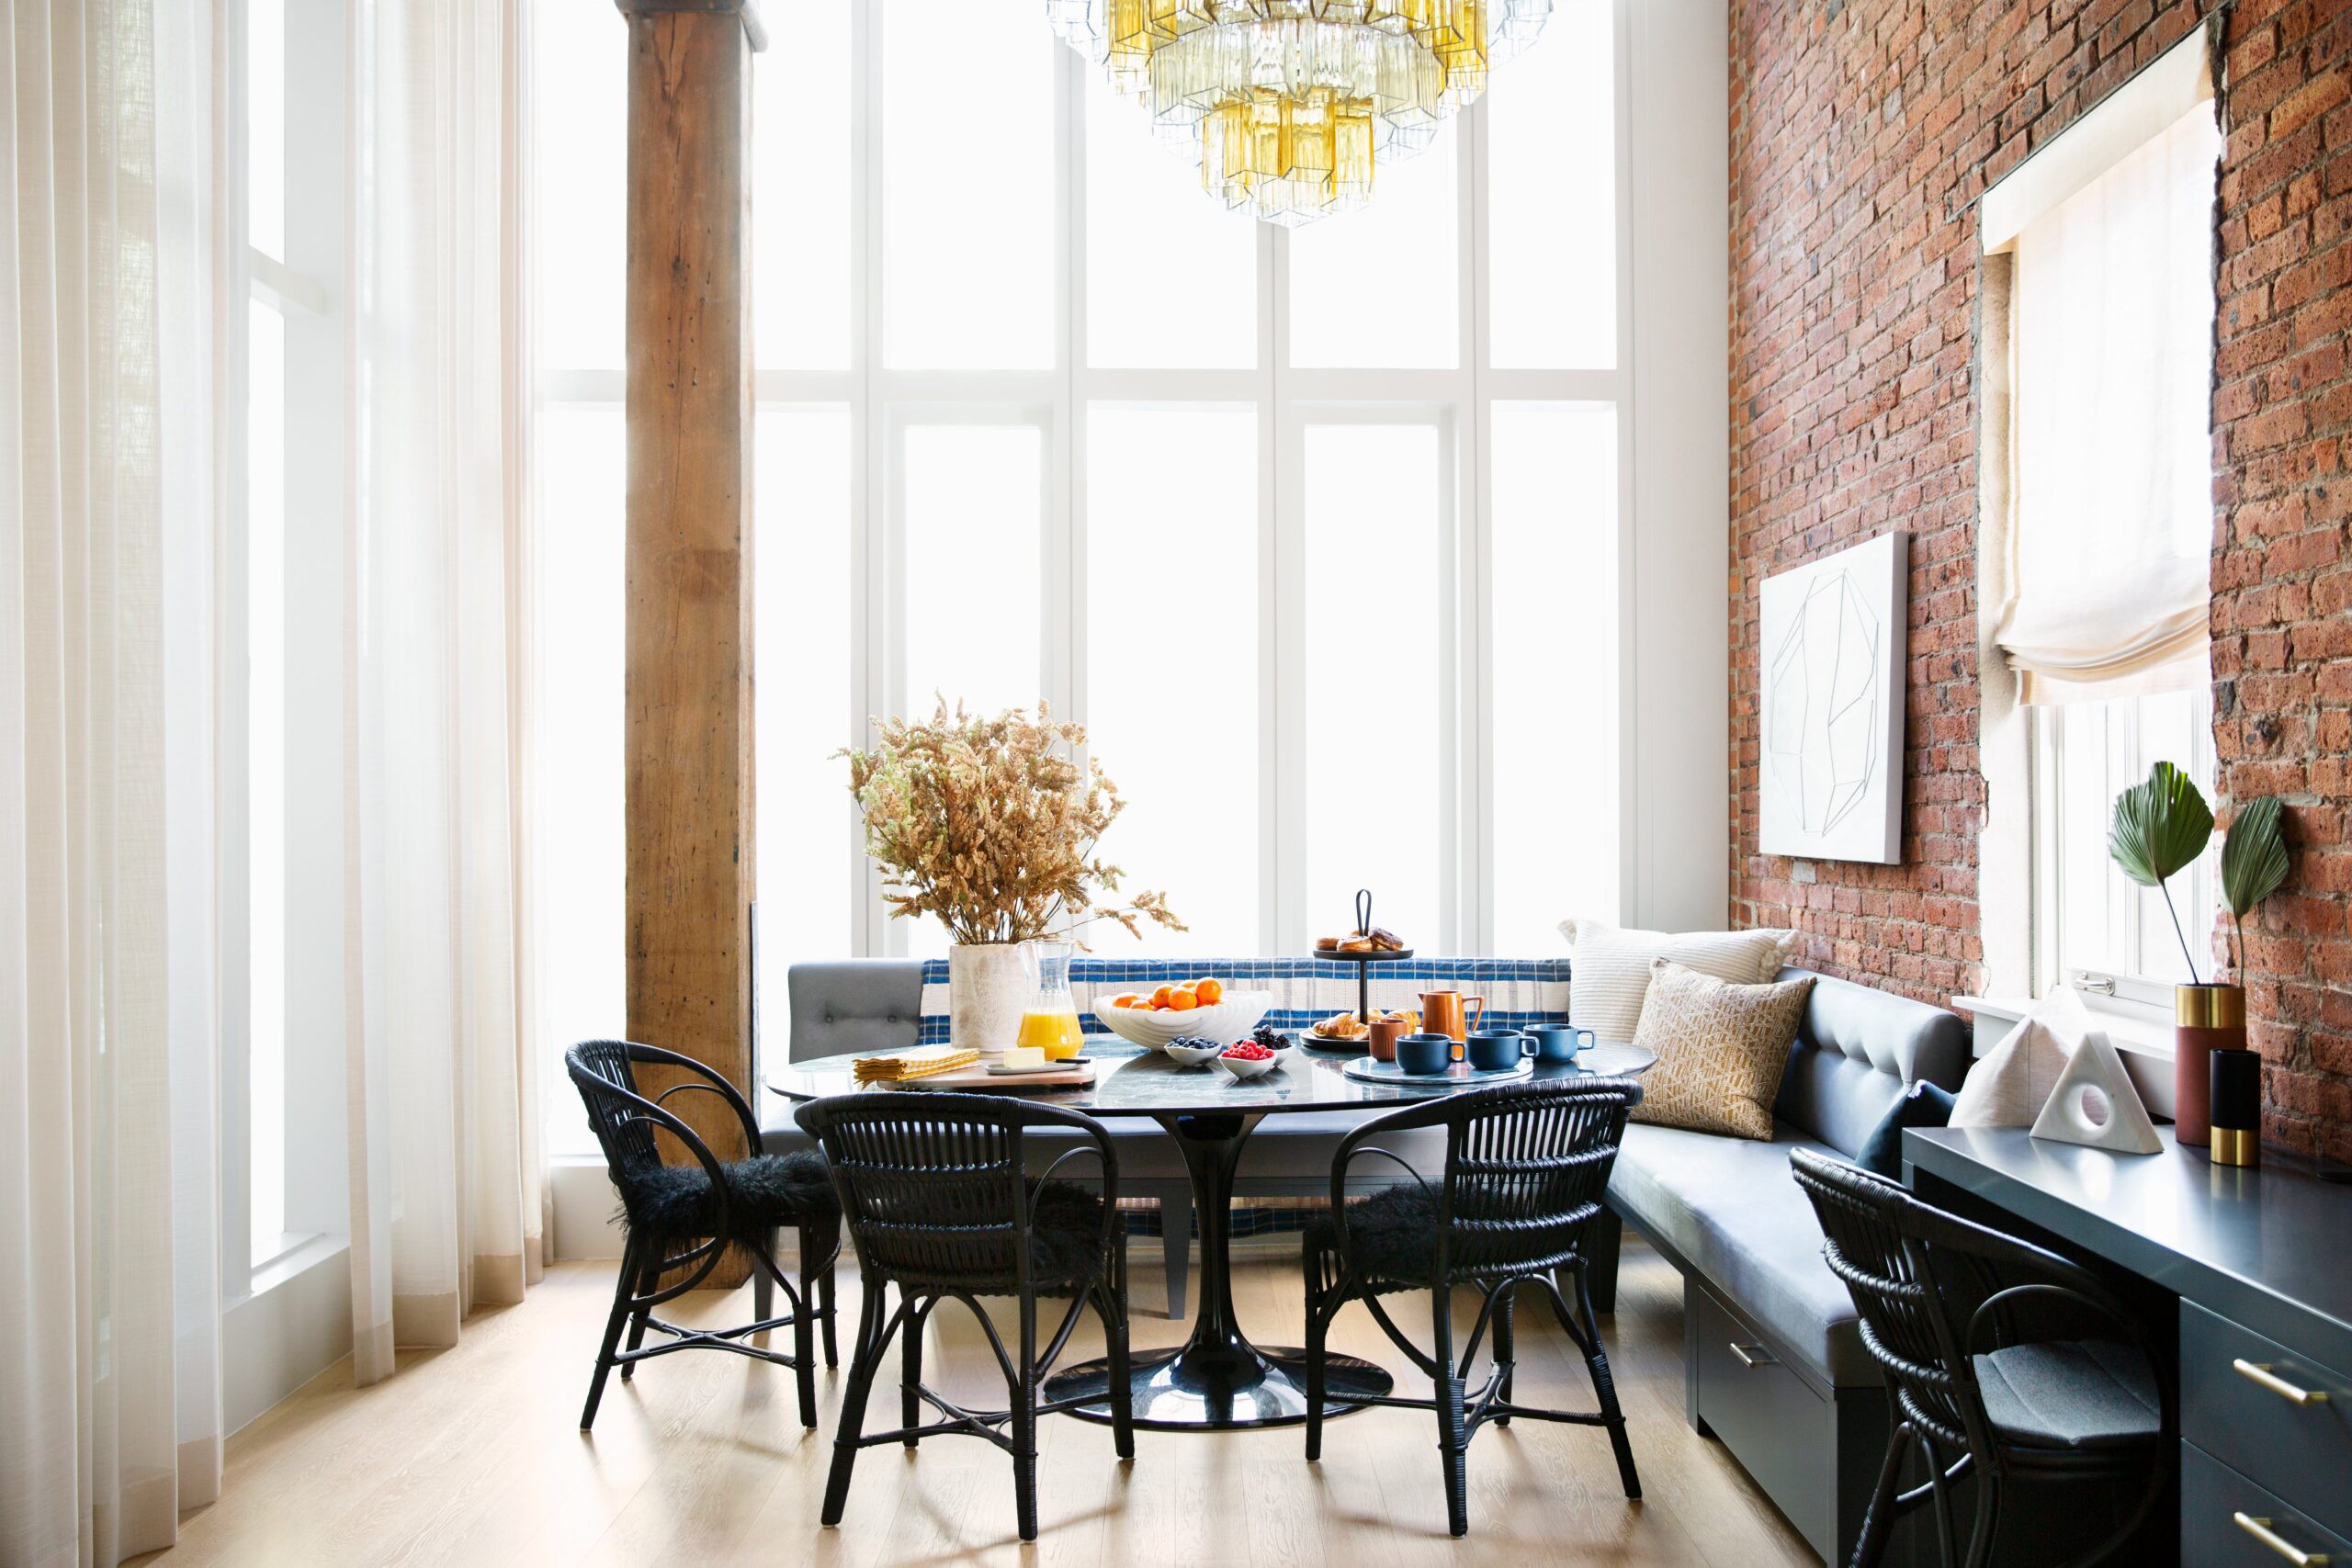 Dumbo dining room by Bella Mancini